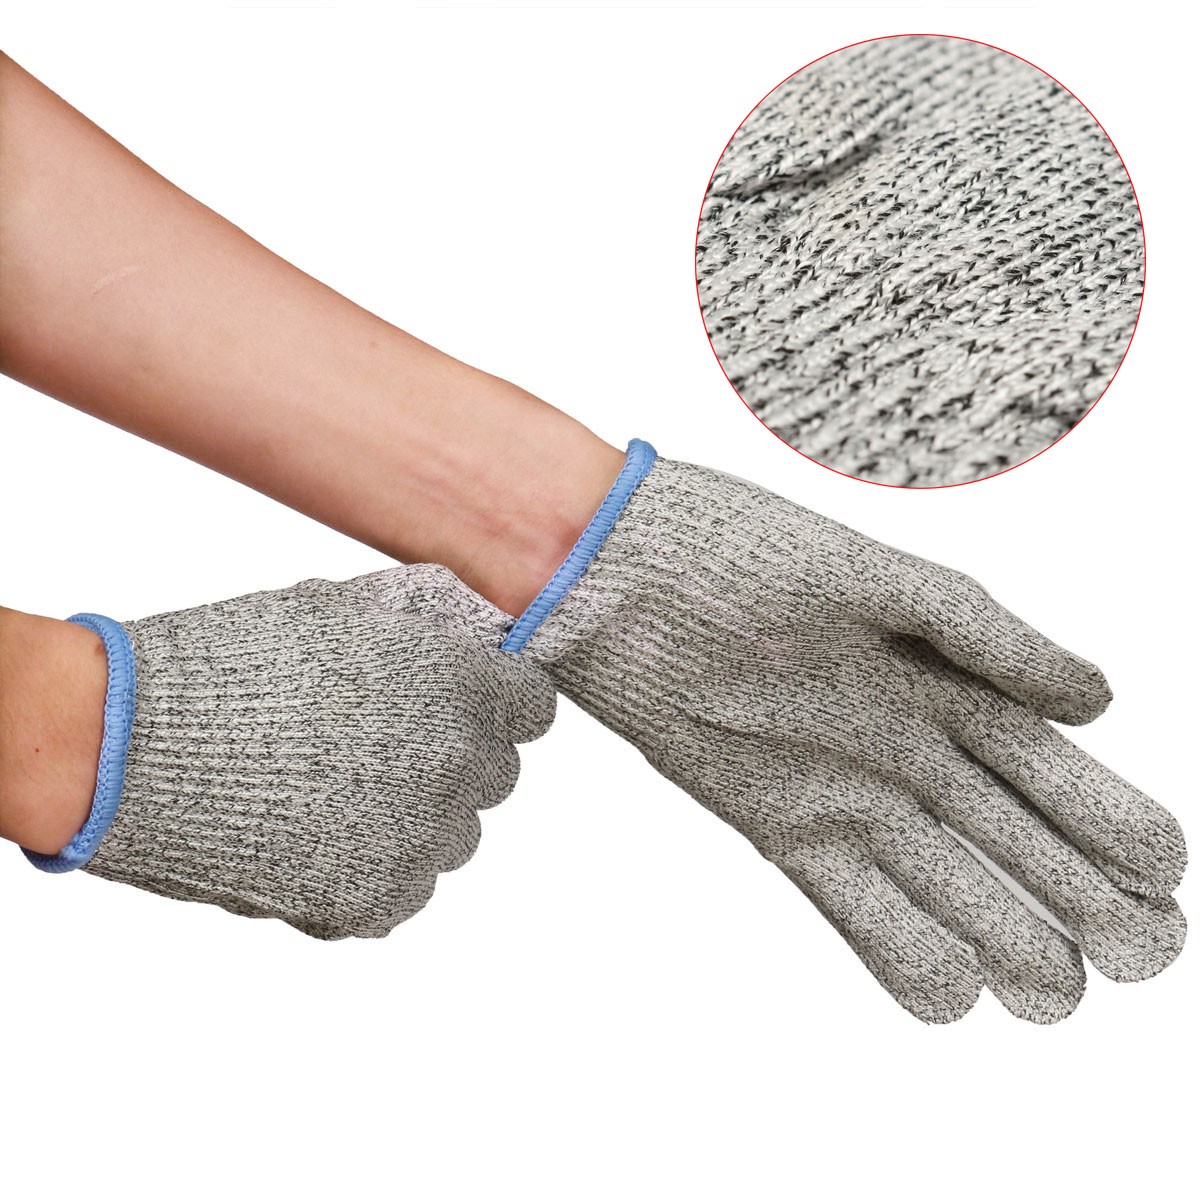 1-Pair-Safety-Stab-Anti-Slash-Resistant-Gloves-Level-5-Protection-1066793